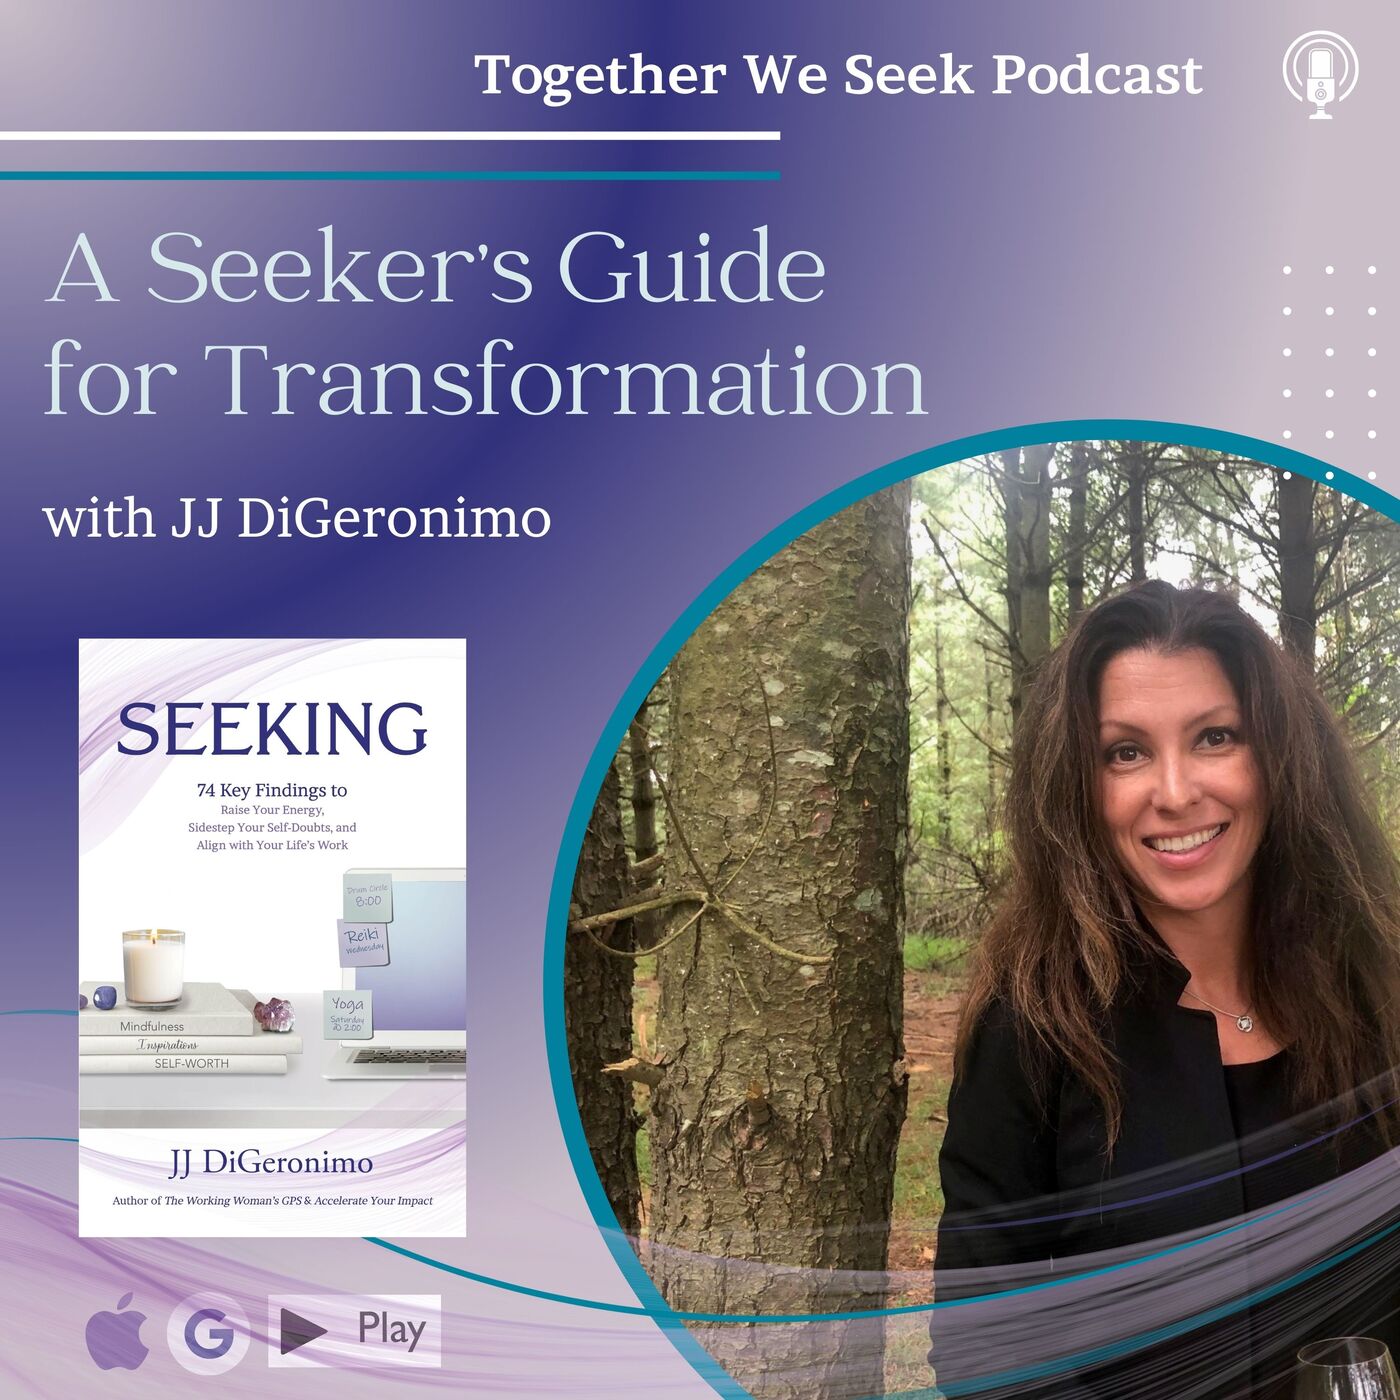 A Seeker’s Guide for Transformation